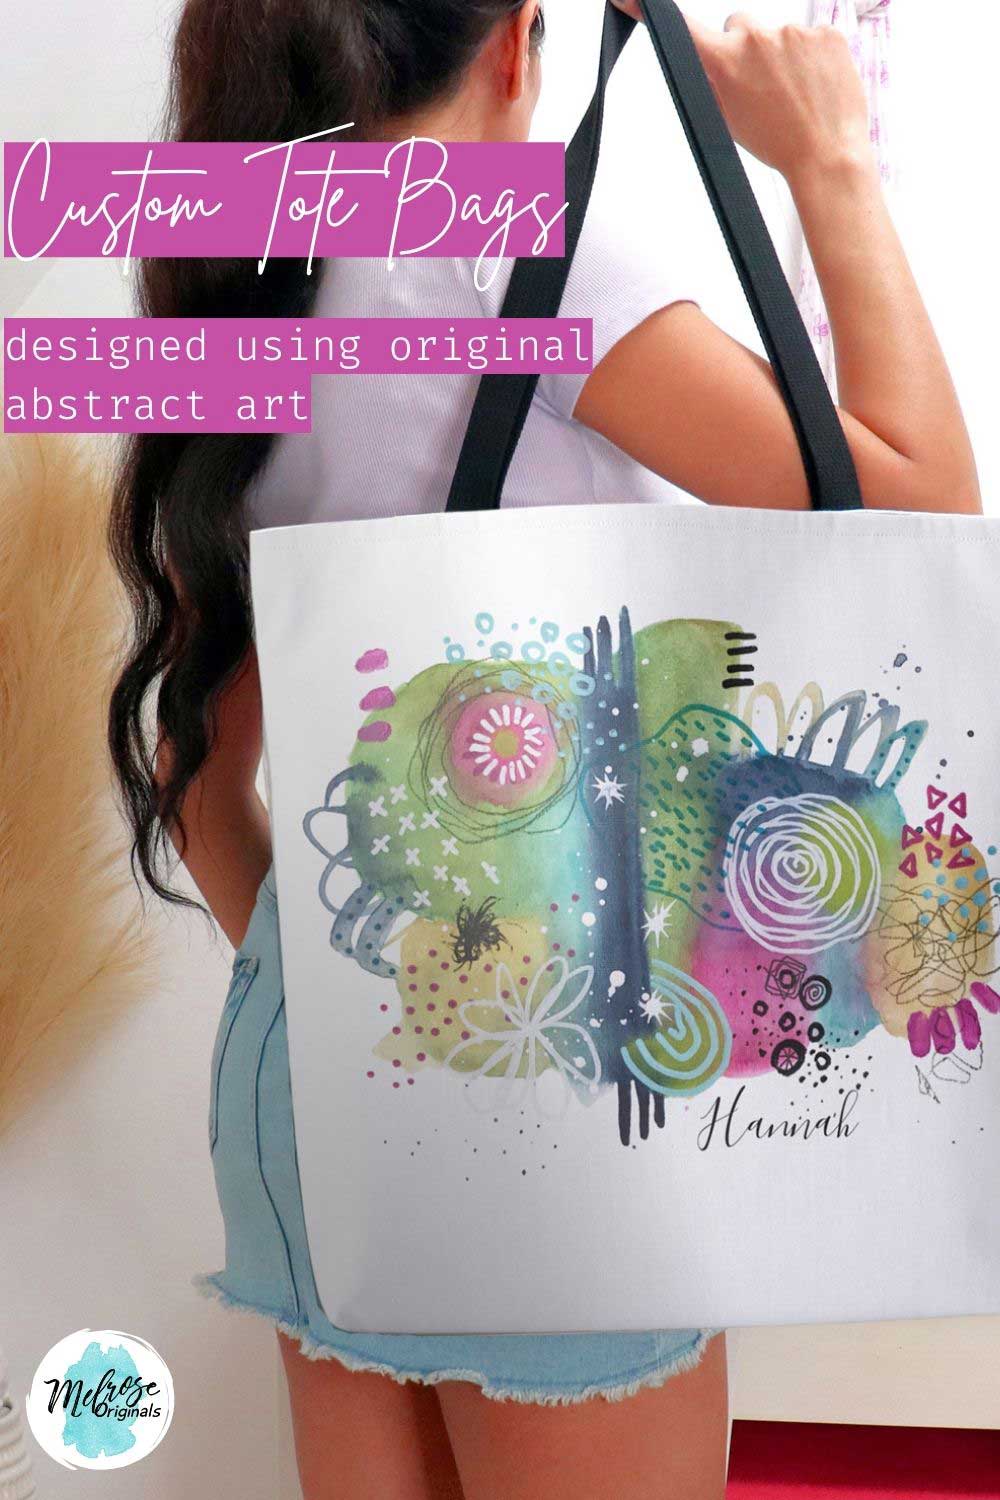 pinnable image of a woman holding a personalized tote bag with abstract art